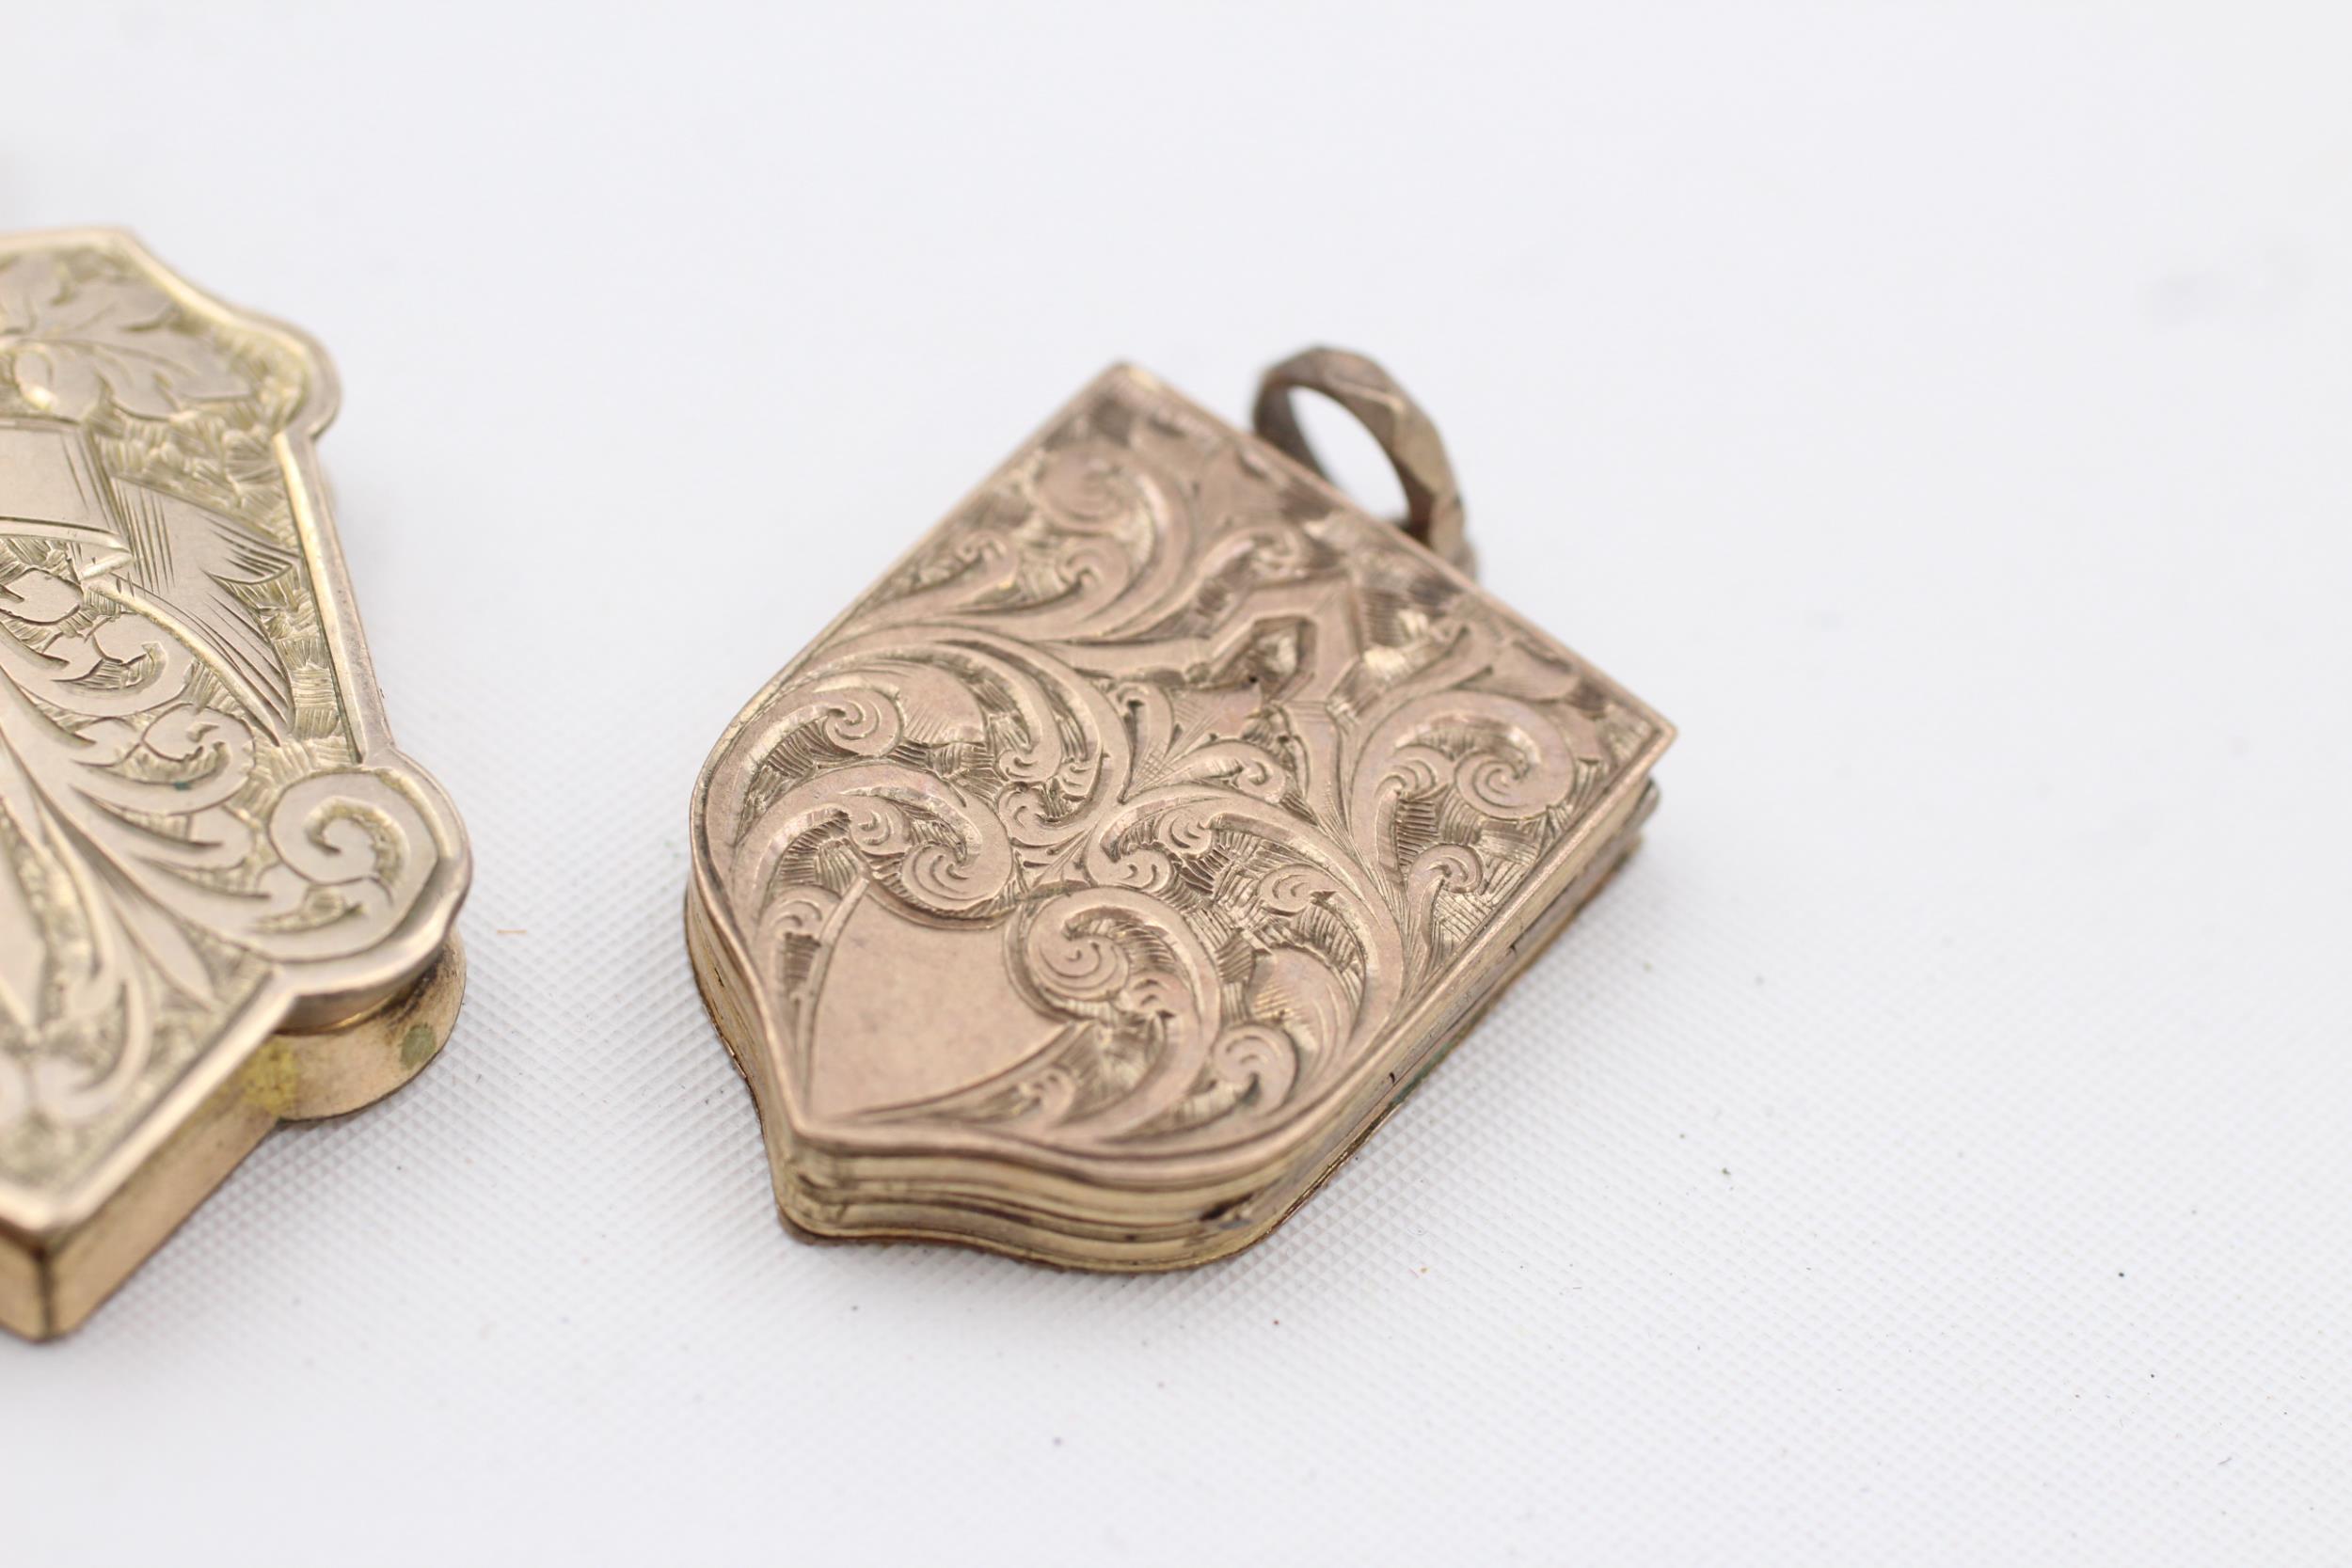 2 x 9ct back & front gold antique foliate shield crest lockets (16.4g) - Image 3 of 4